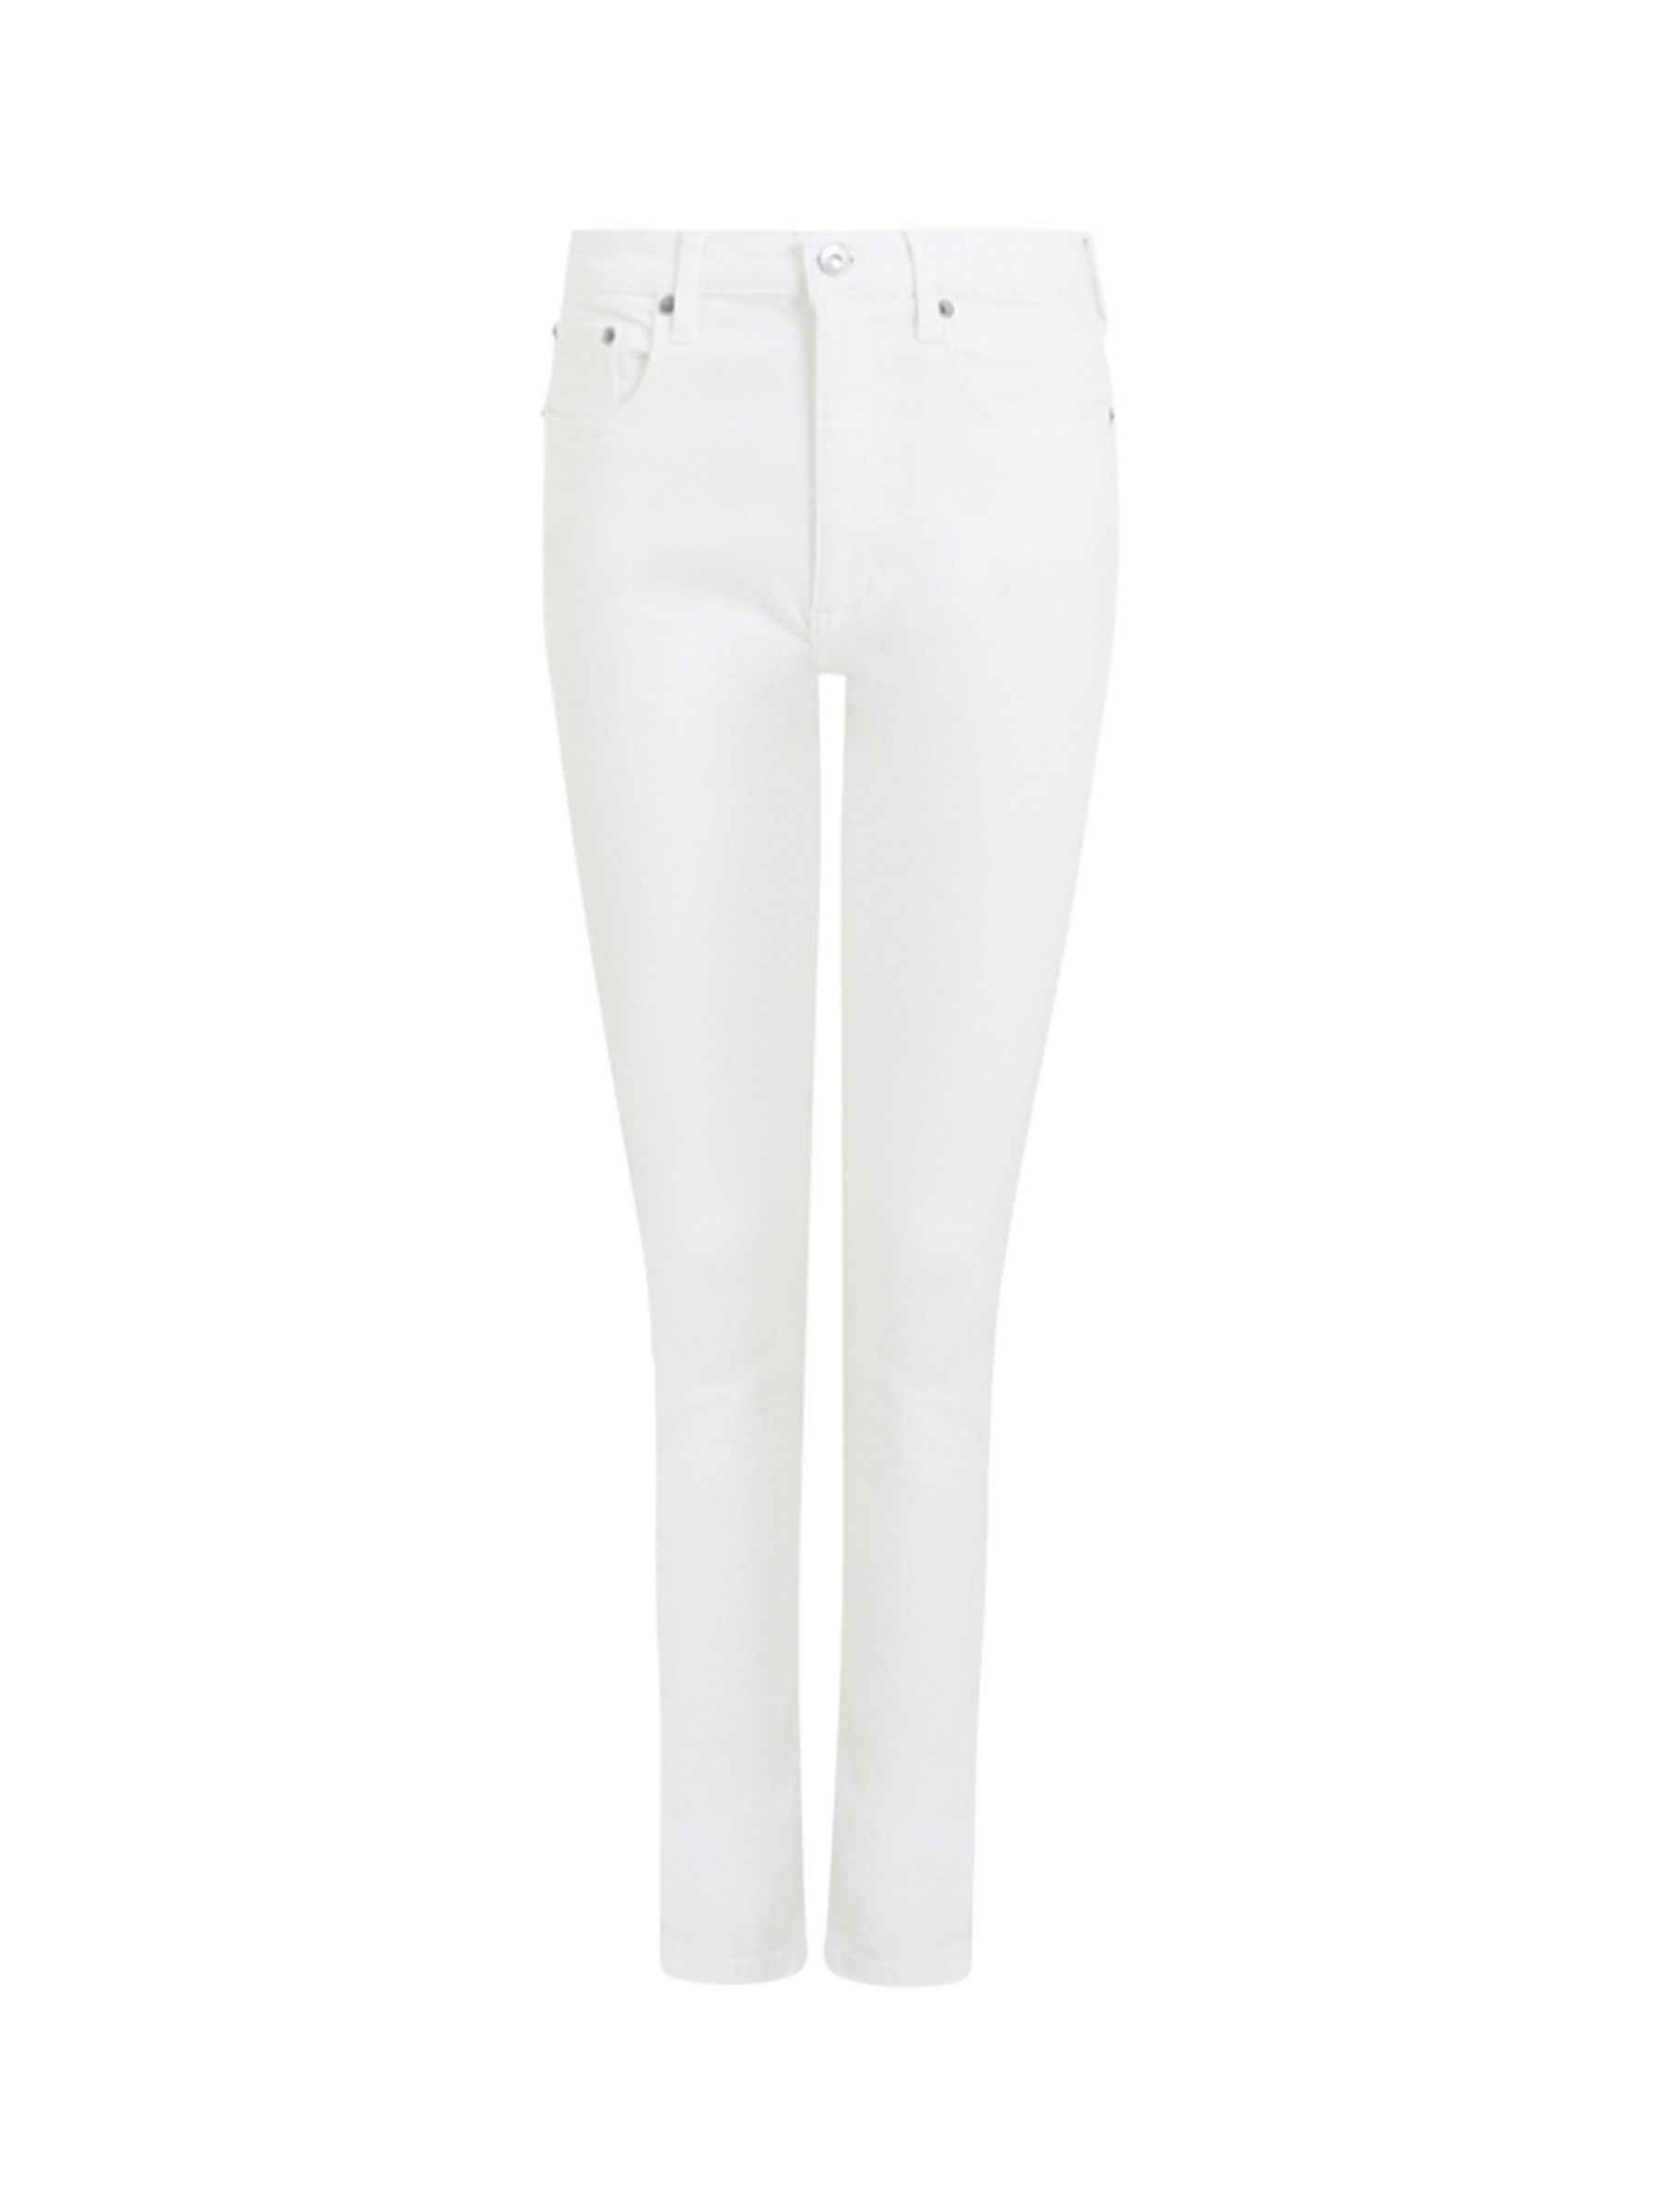 French Connection Rebound Skinny Jeans, White at John Lewis & Partners